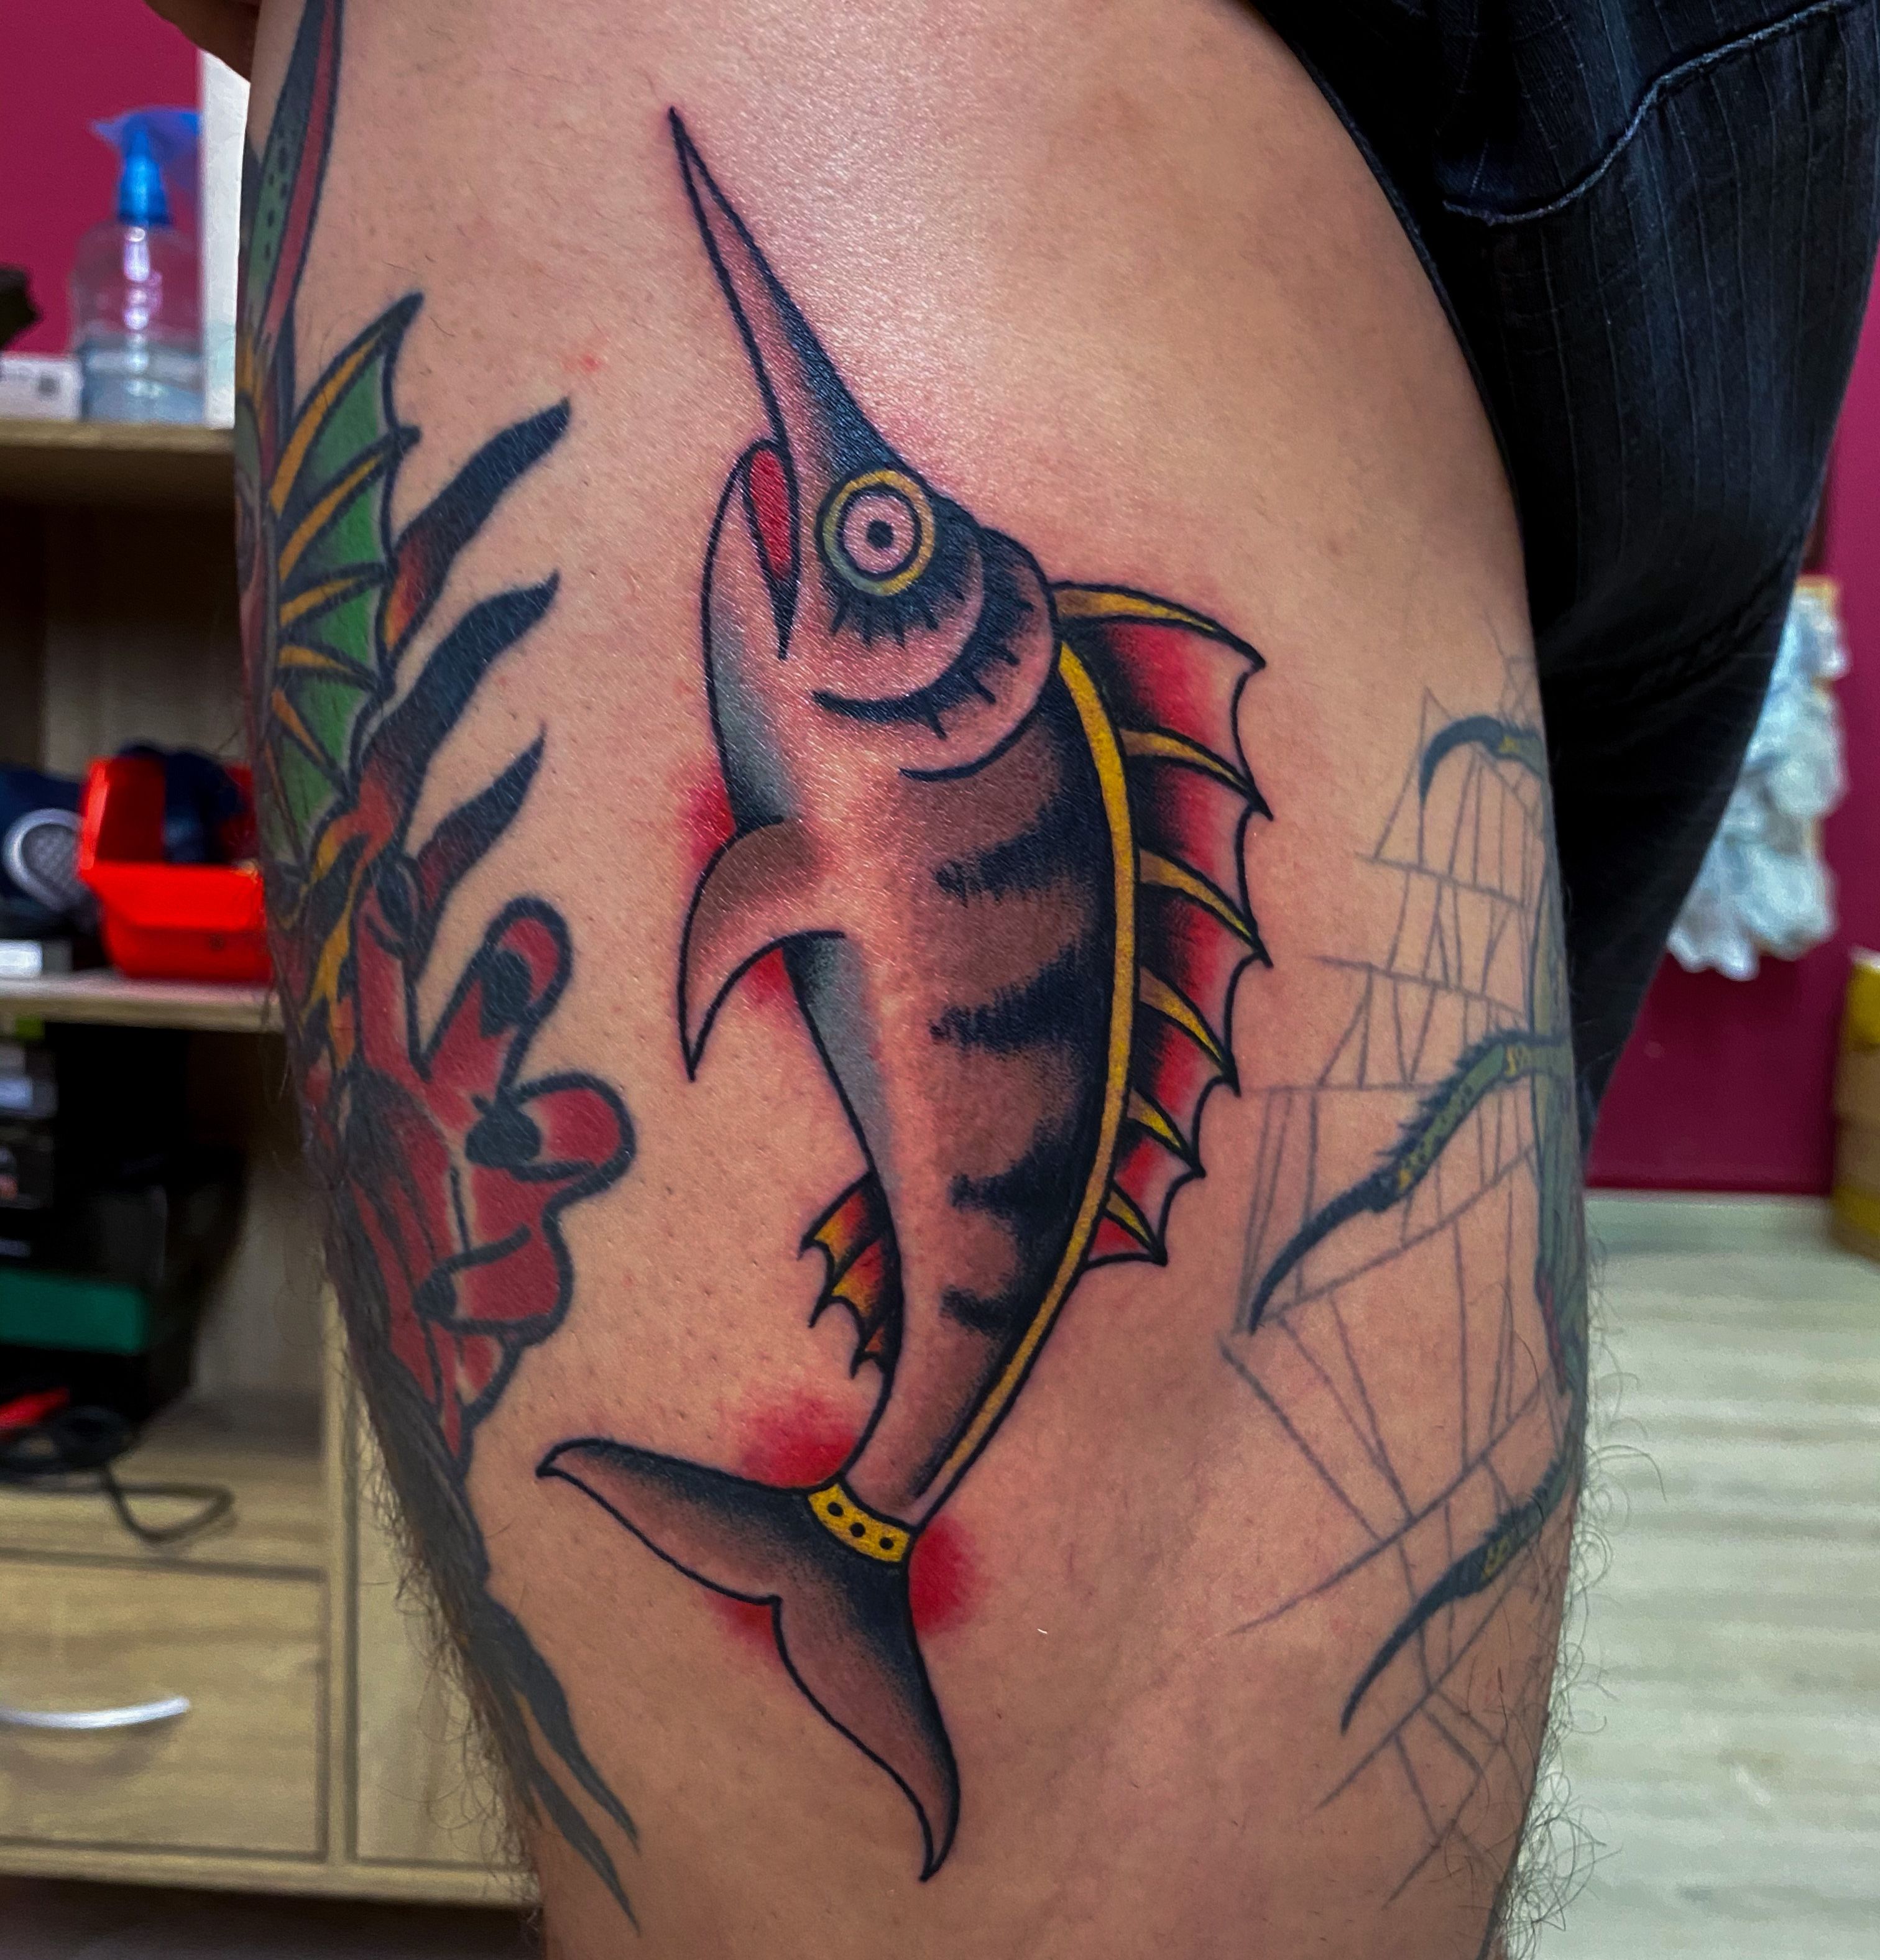 Steel Spades Tattoo Company  Very colorful traditional design of an angler  fish done by laurenlovetattoo CallDm us for availability walkins  welcomed too colorful anglerfish fish oldschool traditional  throwbackthursday  Facebook